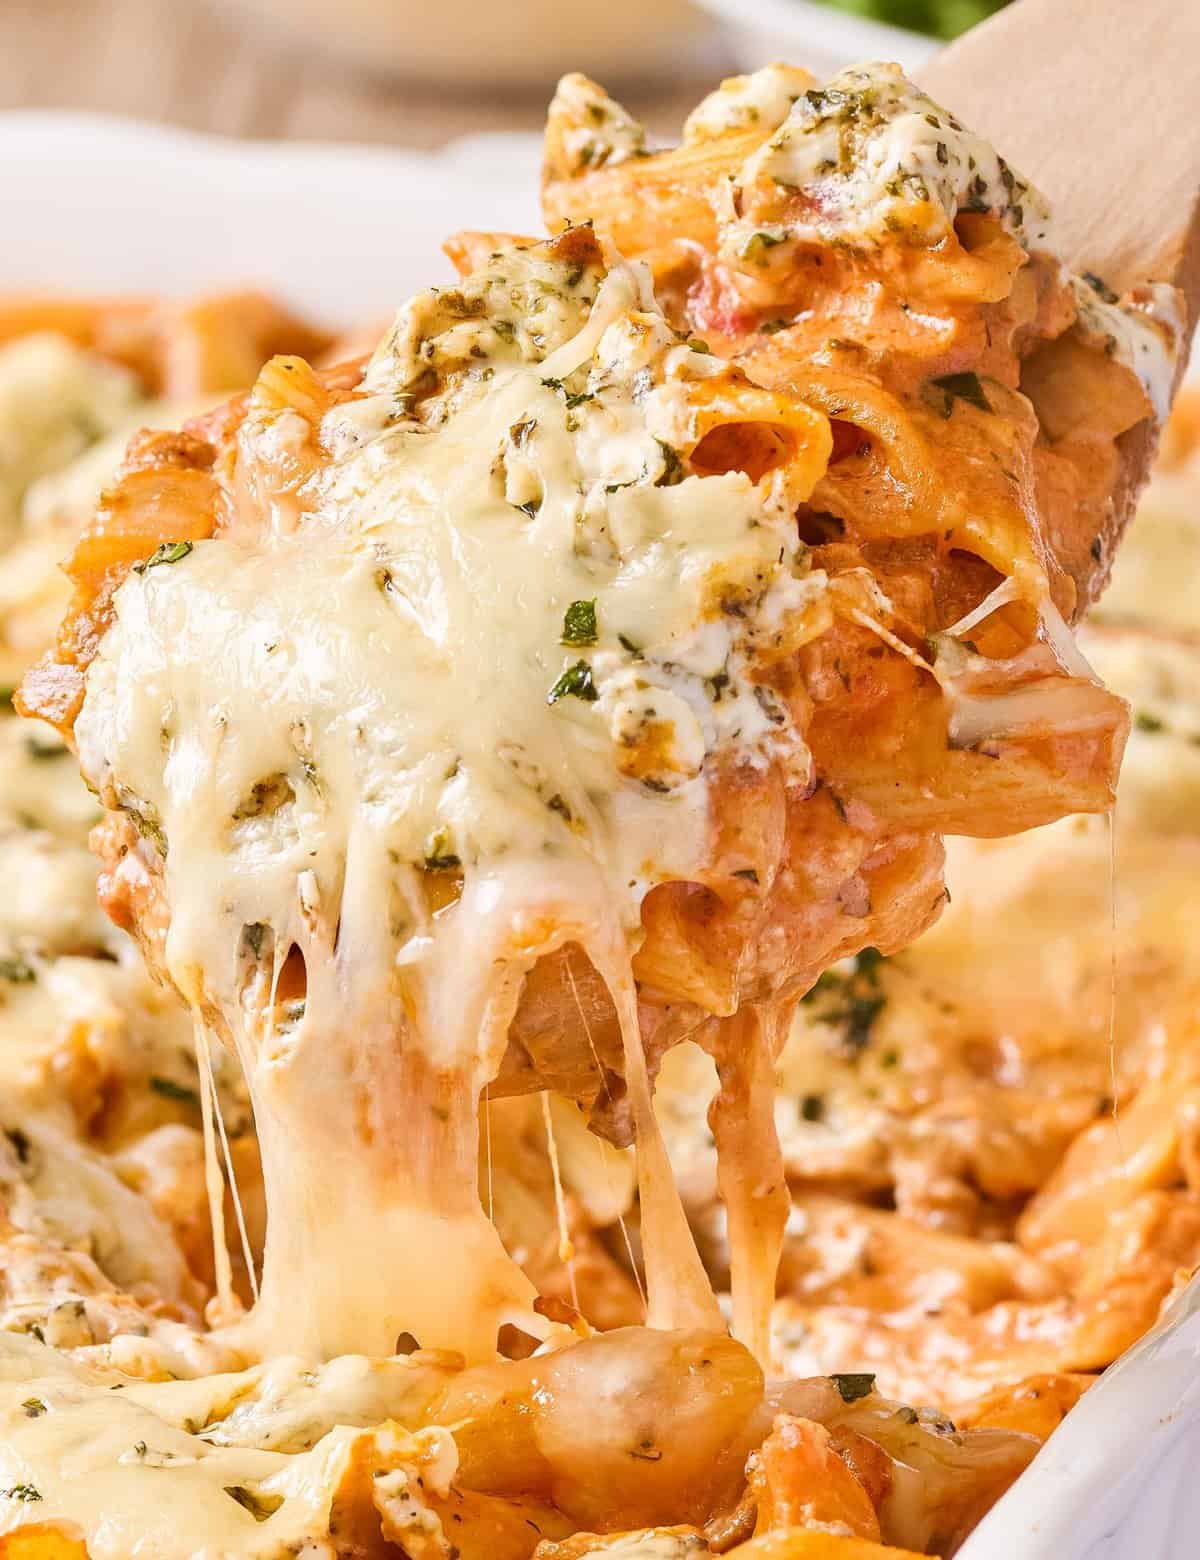 This creamy baked penne recipe is loaded with meaty and cheesy deliciousness! Perfect as a freezer meal or a big family dinner, this pasta bake is made with al dente pasta, a creamy marinara meat sauce, herbed cream cheese, and plenty of mozzarella and Parmesan!